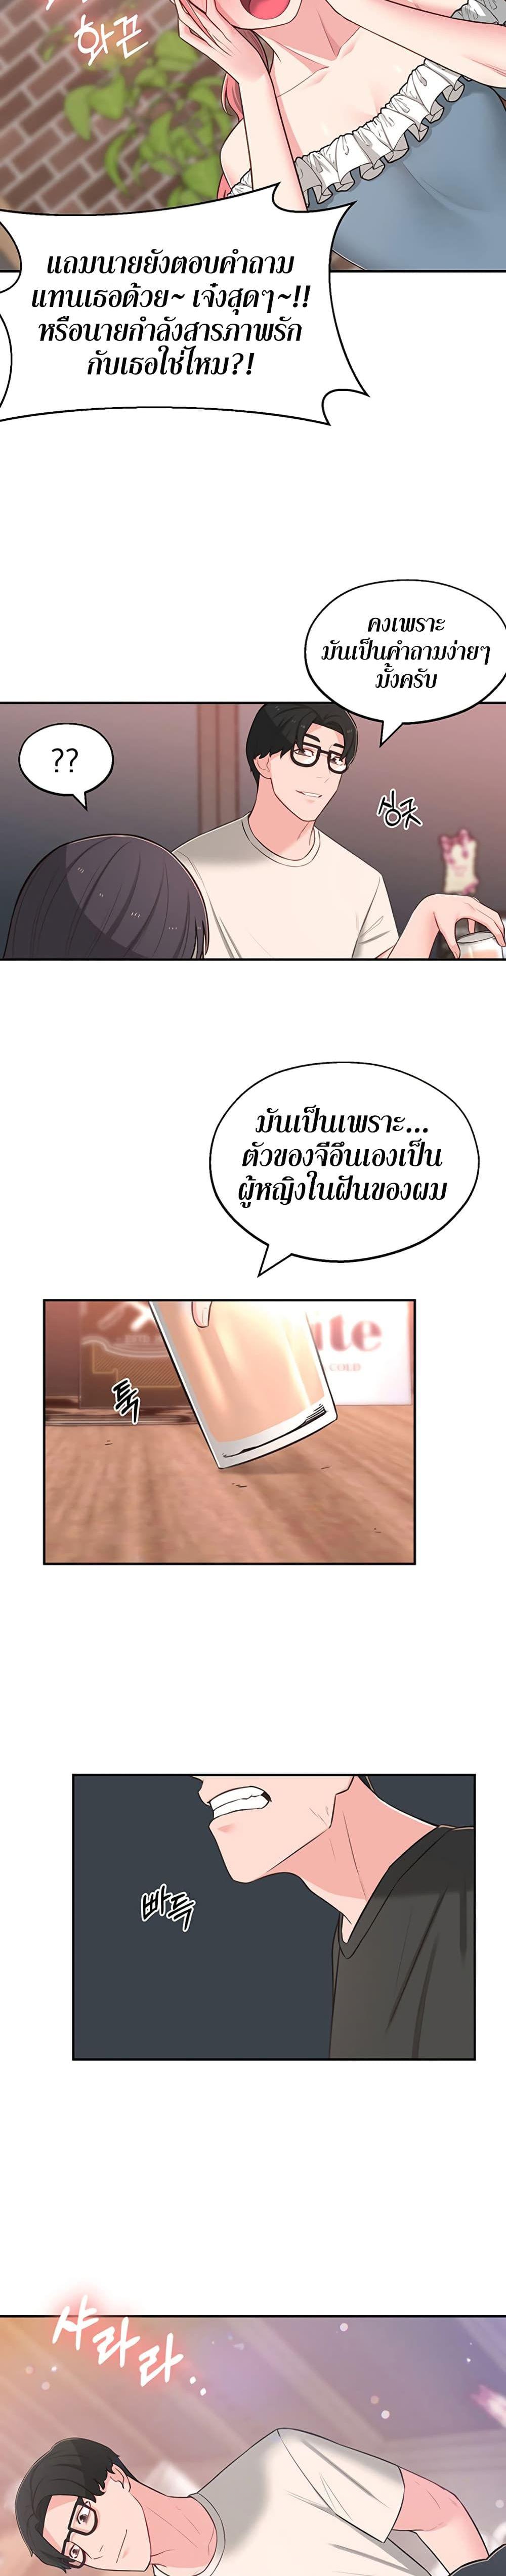 A Knowing Sister 13 ภาพ 21